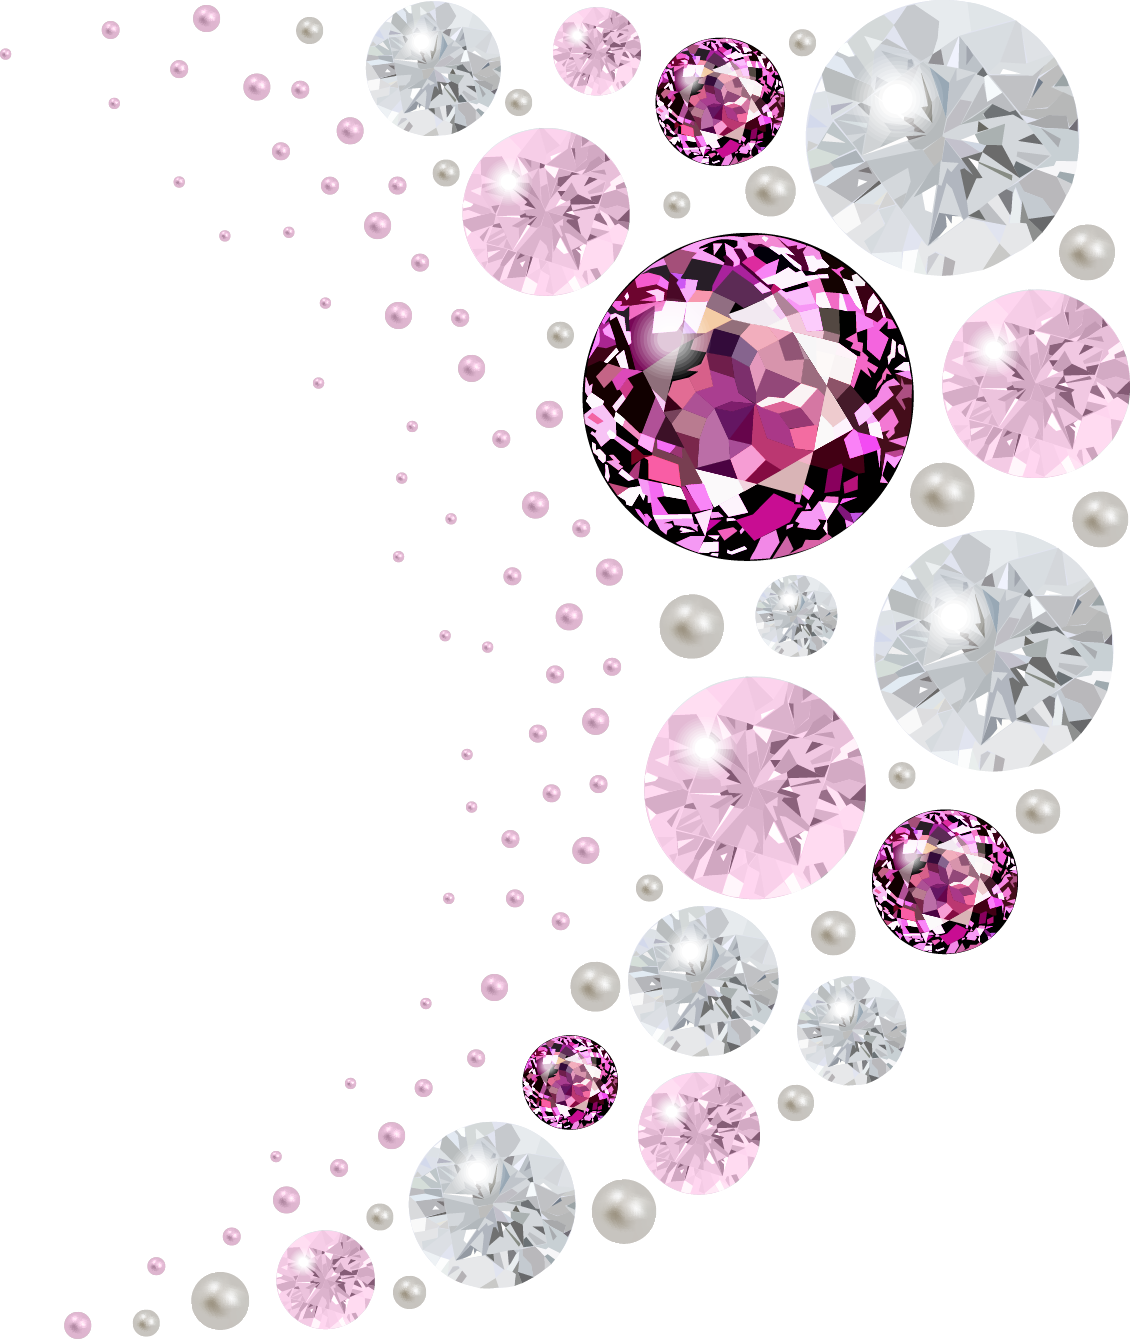 Diamond Gem PNG Download Free Clipart